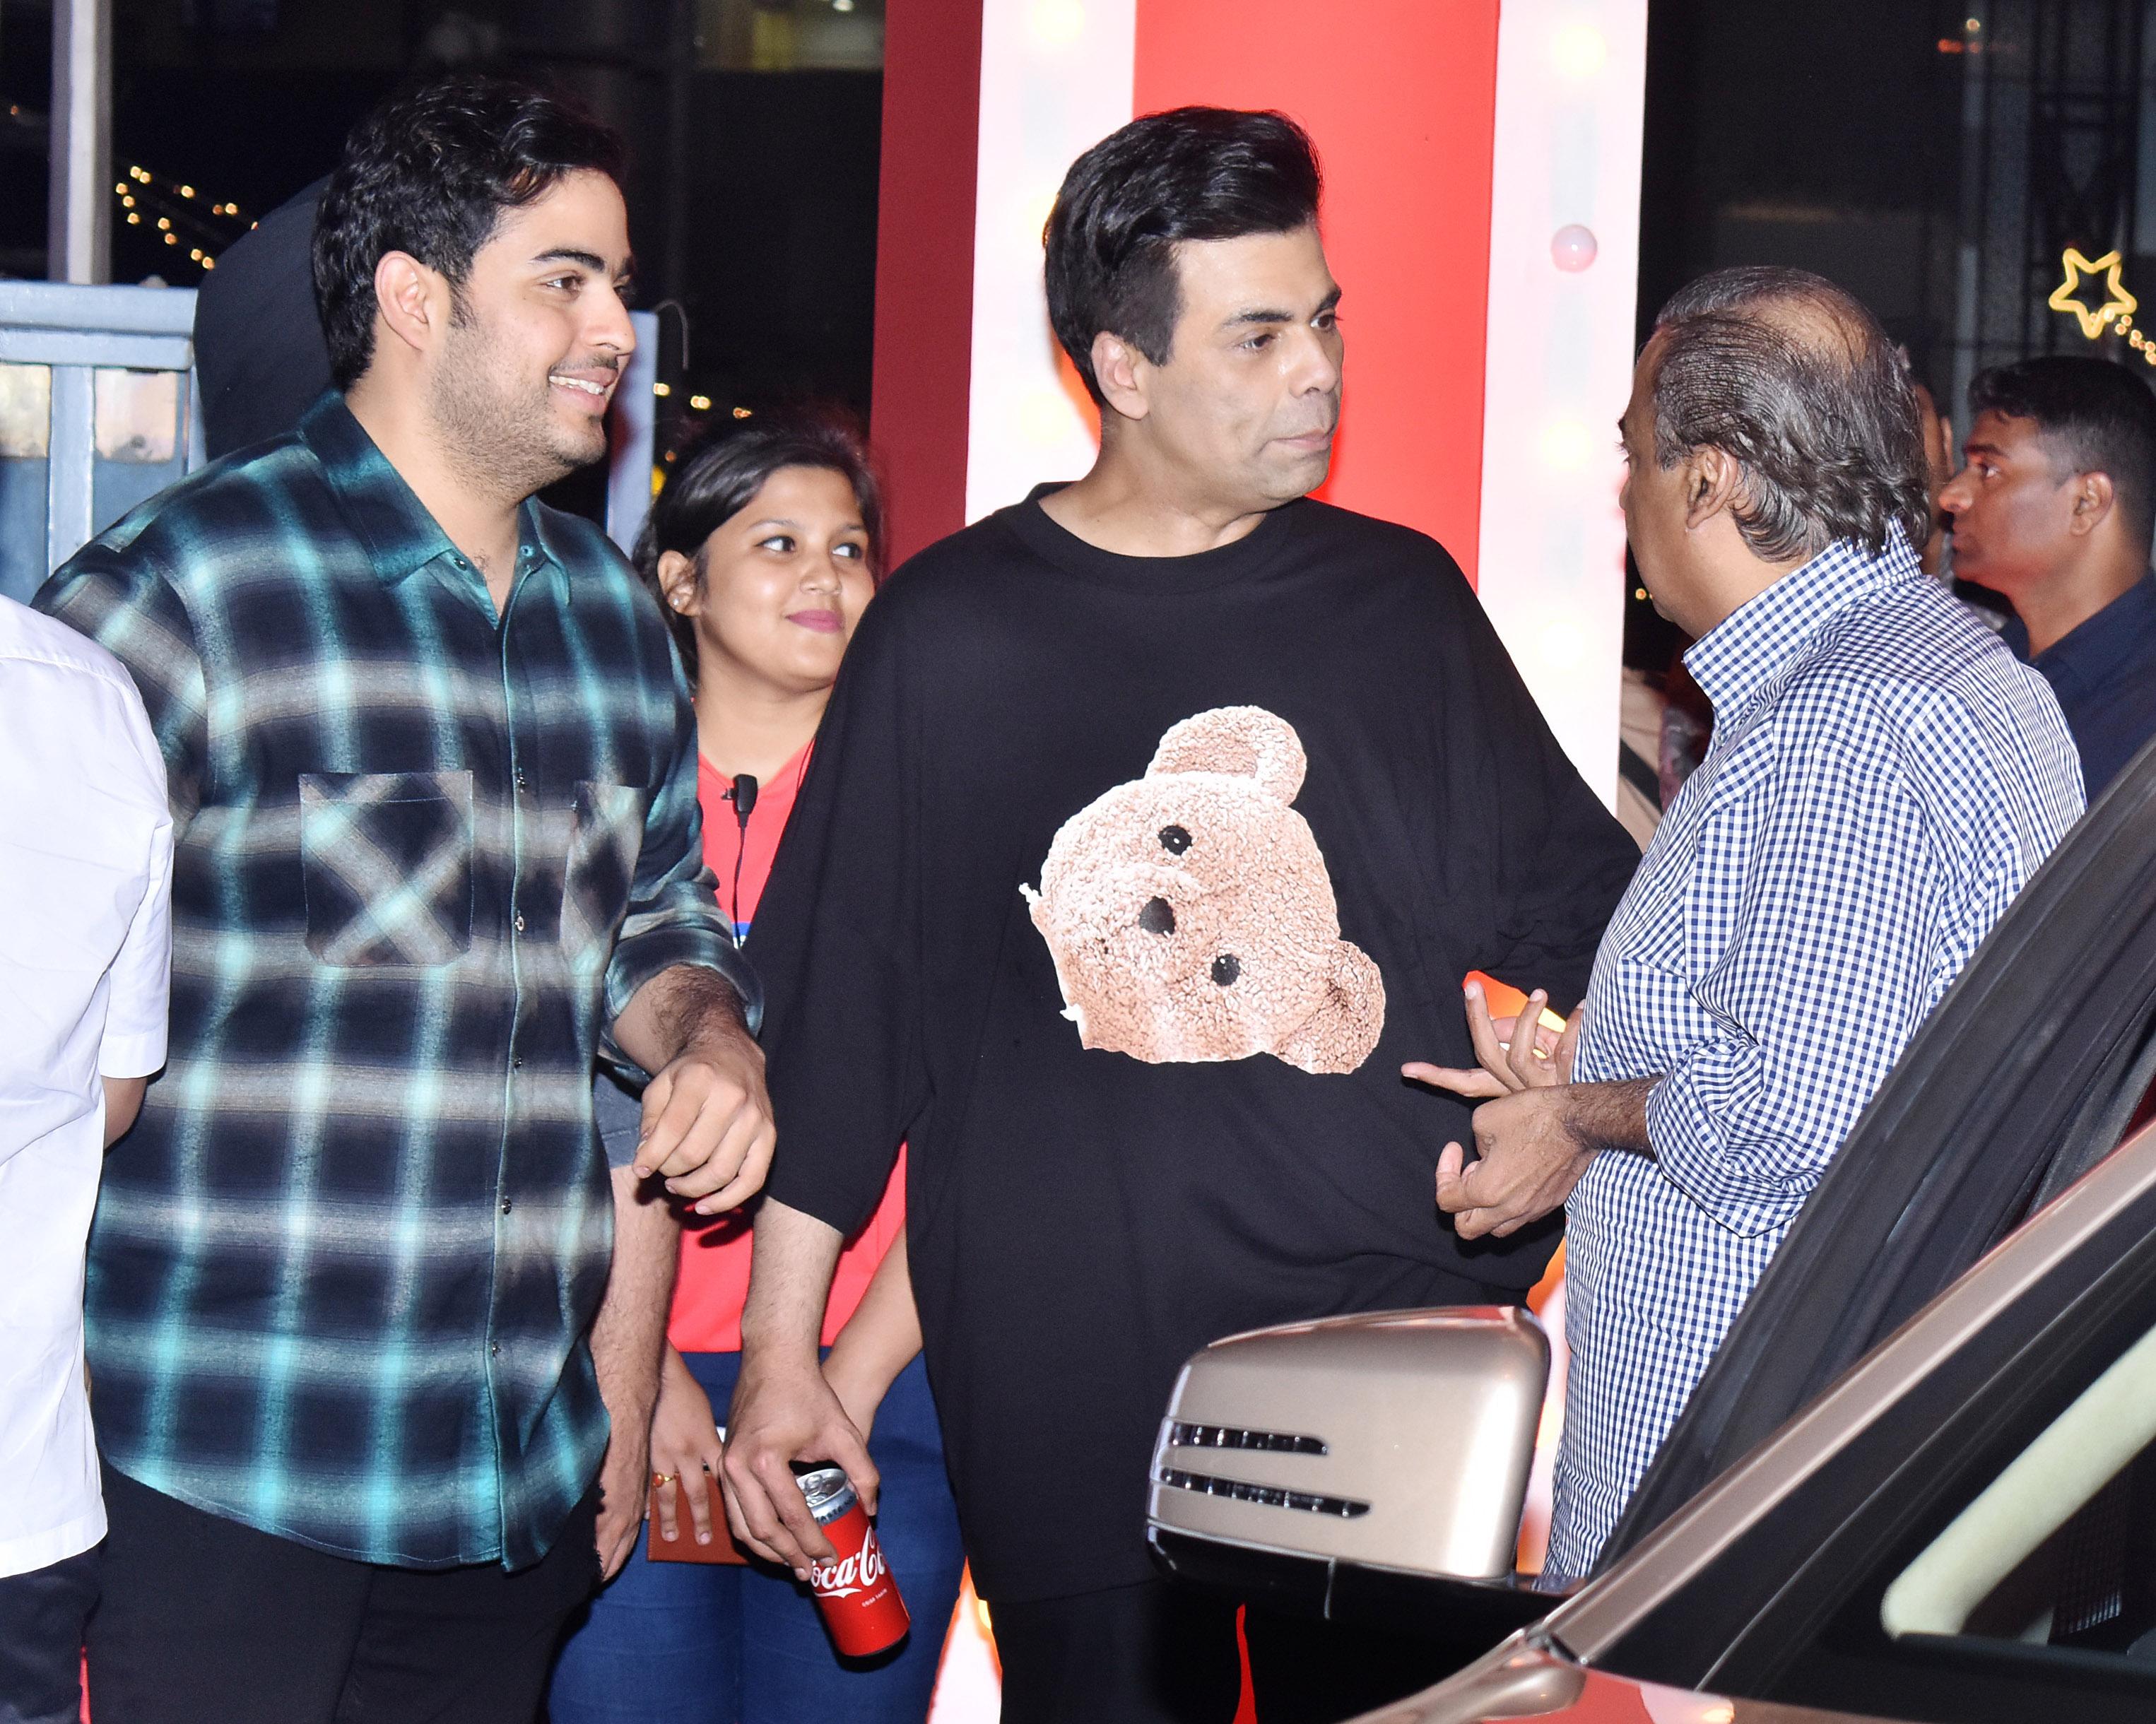 Karan Johar, who came in with his children Yash and Roohi was seen having a candid conversation with the father-son duo Mukesh and Akash Ambani